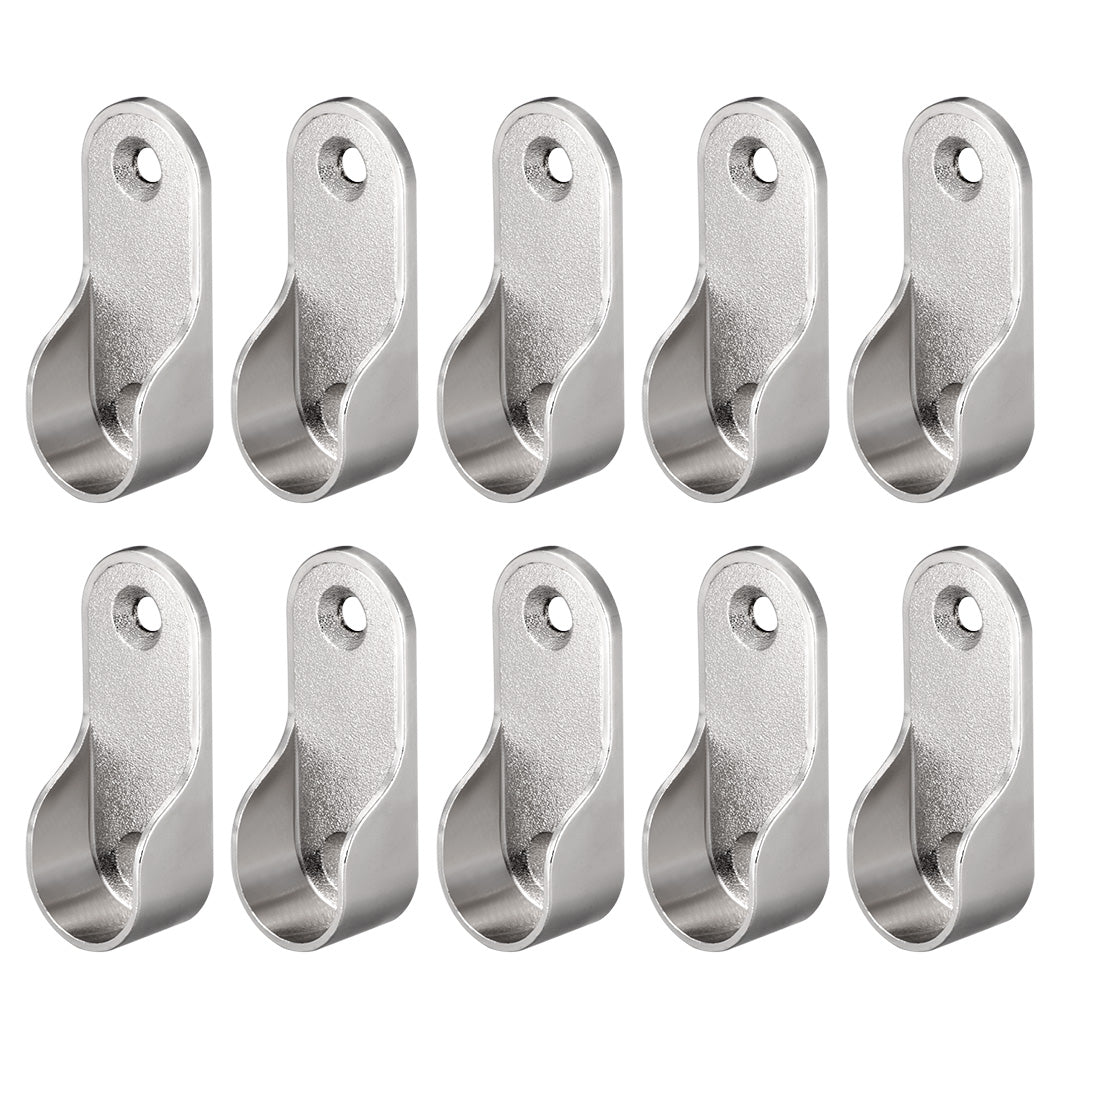 uxcell Uxcell Oval Closet Rod End Supports, Fit Rod Dia 16mm 10 PCS - Wardrobe Rod Flange Bracket Support - Nickel Plating